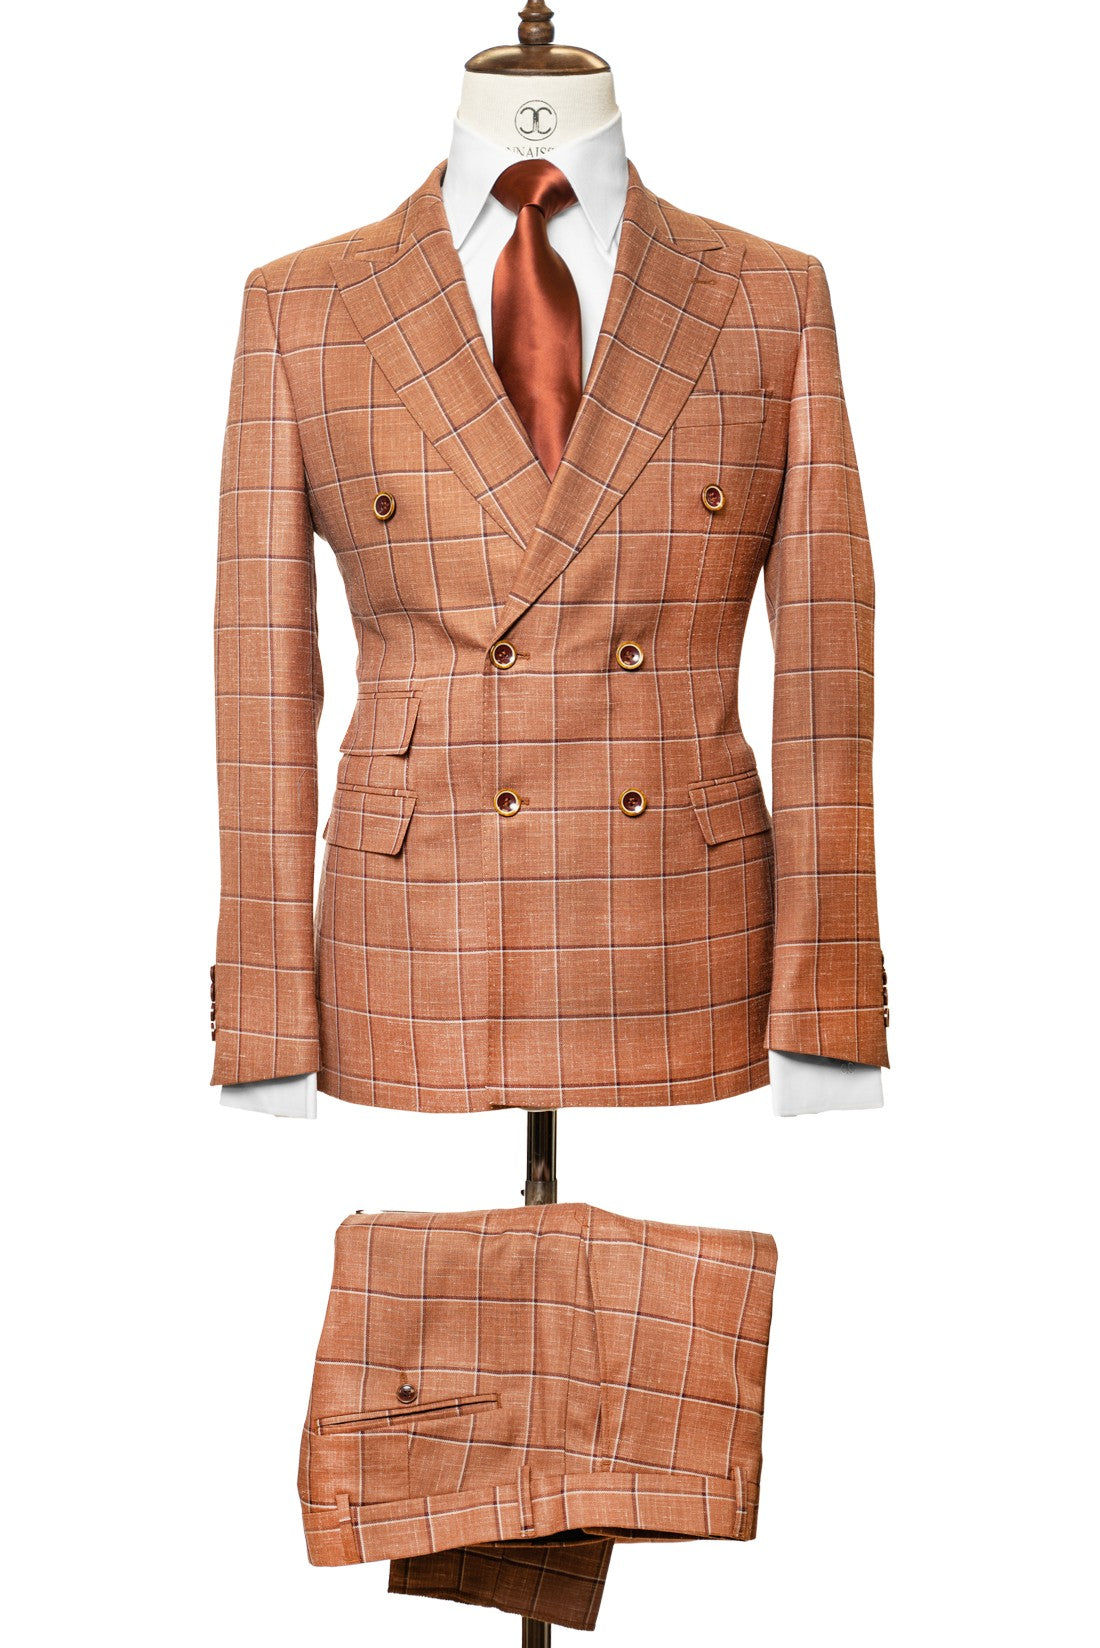 Finitura Felice - Tan with Brown Windowpane Double Breasted 2-Piece Slim Fit Suit